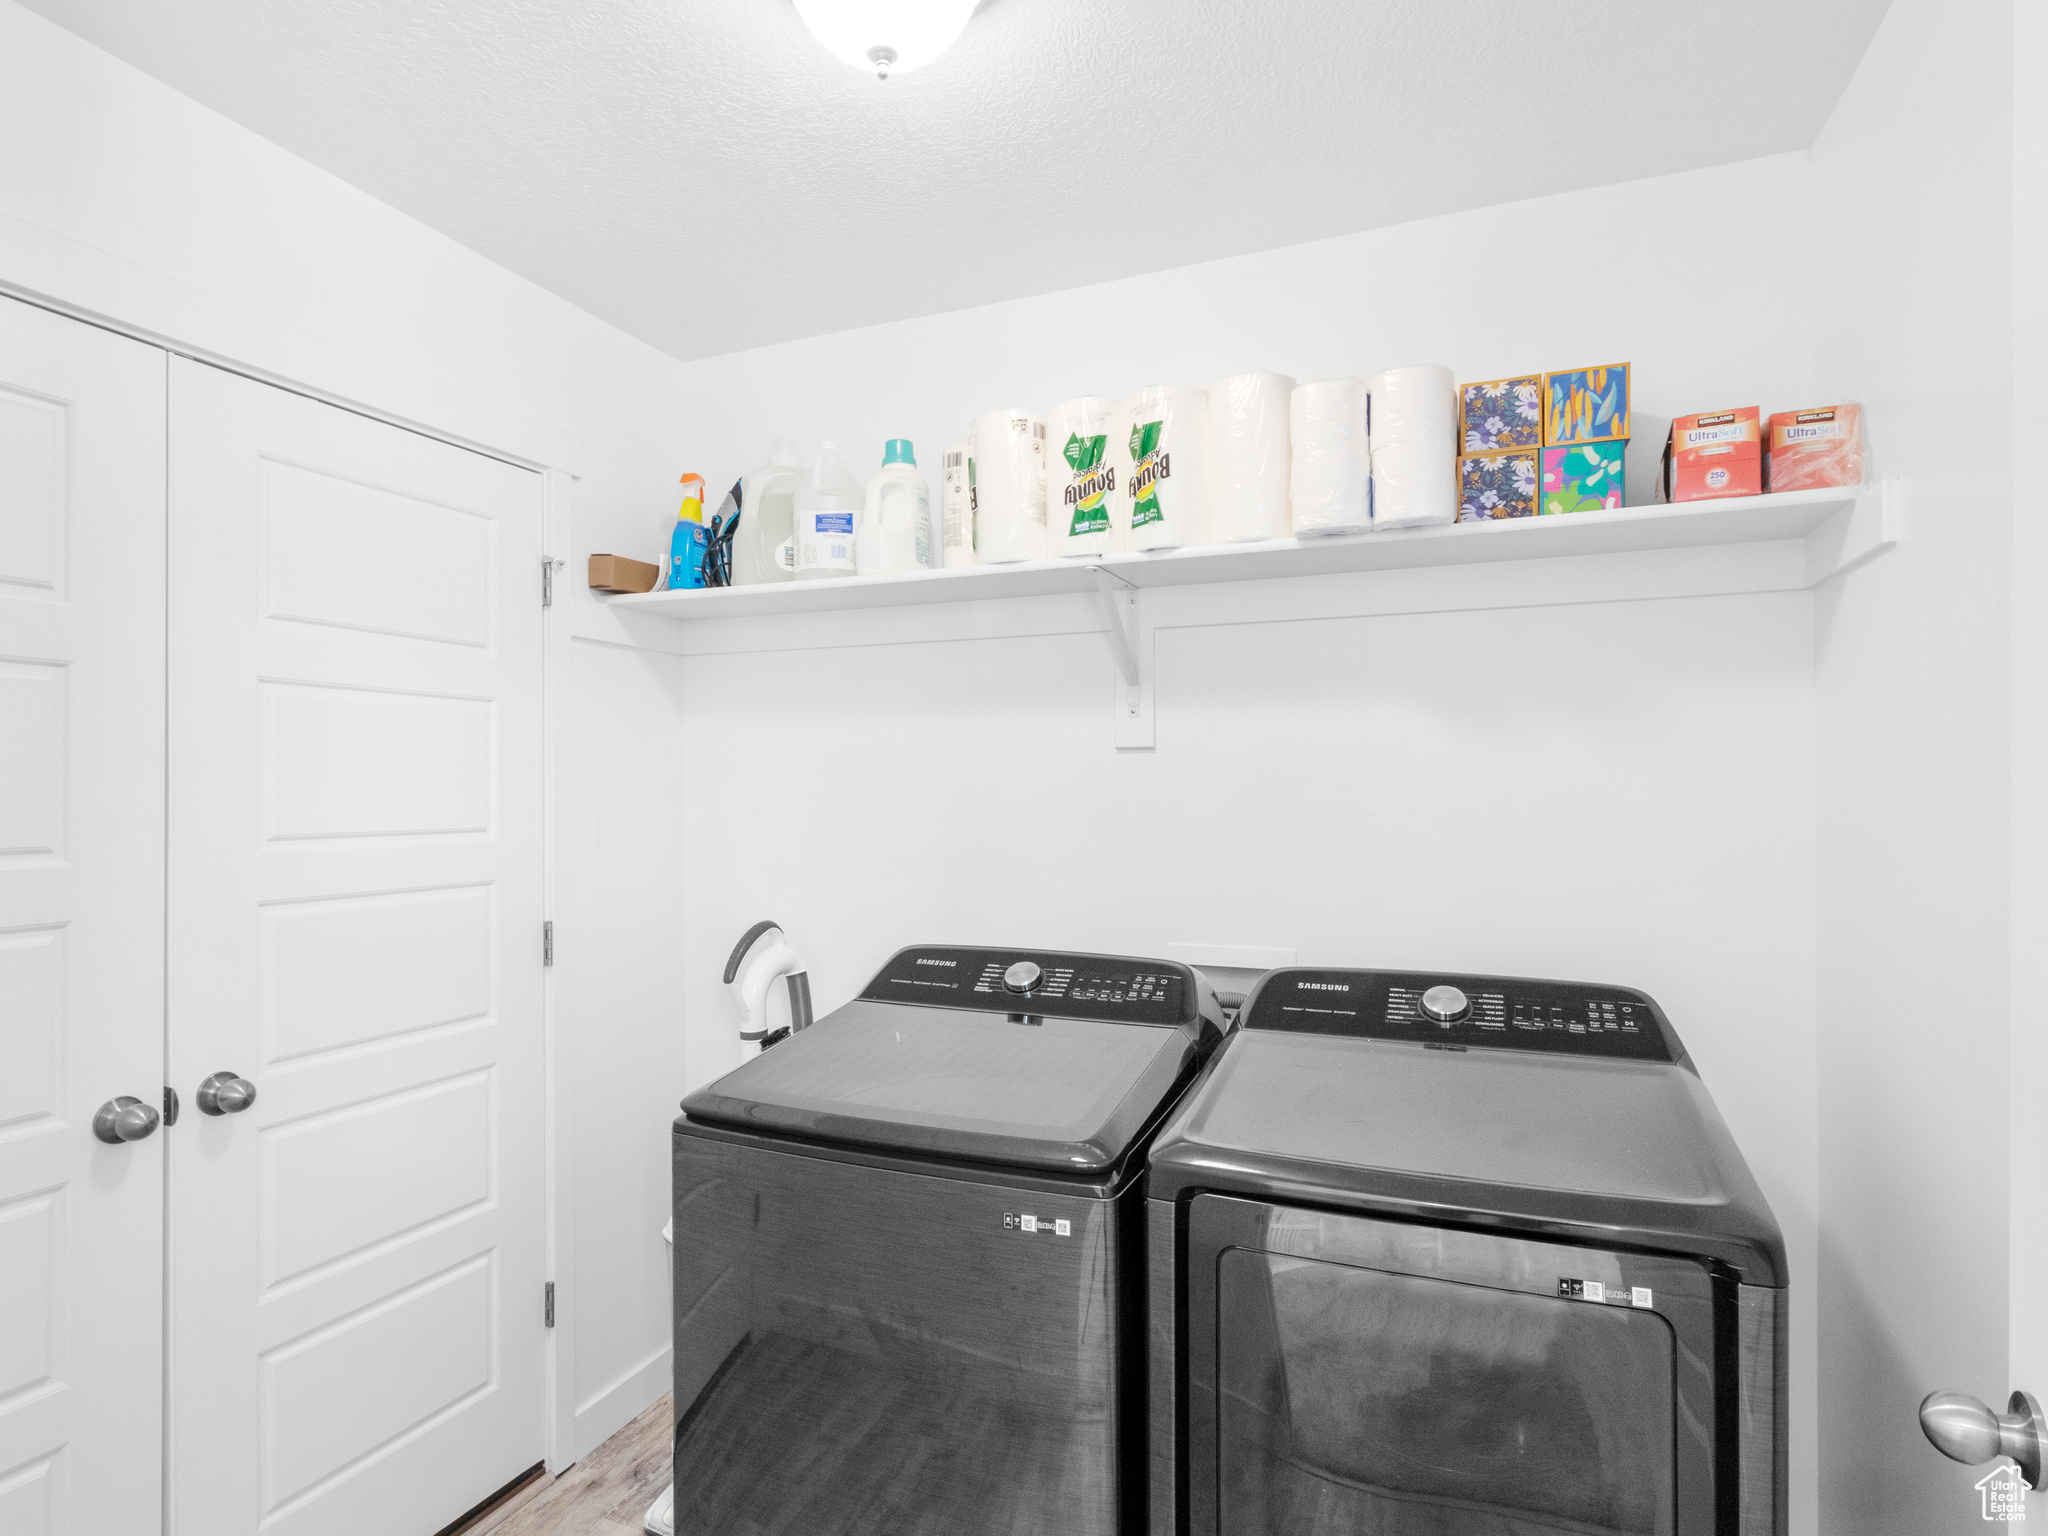 Laundry area with independent washer and dryer, hookup for a washing machine, and hardwood / wood-style flooring